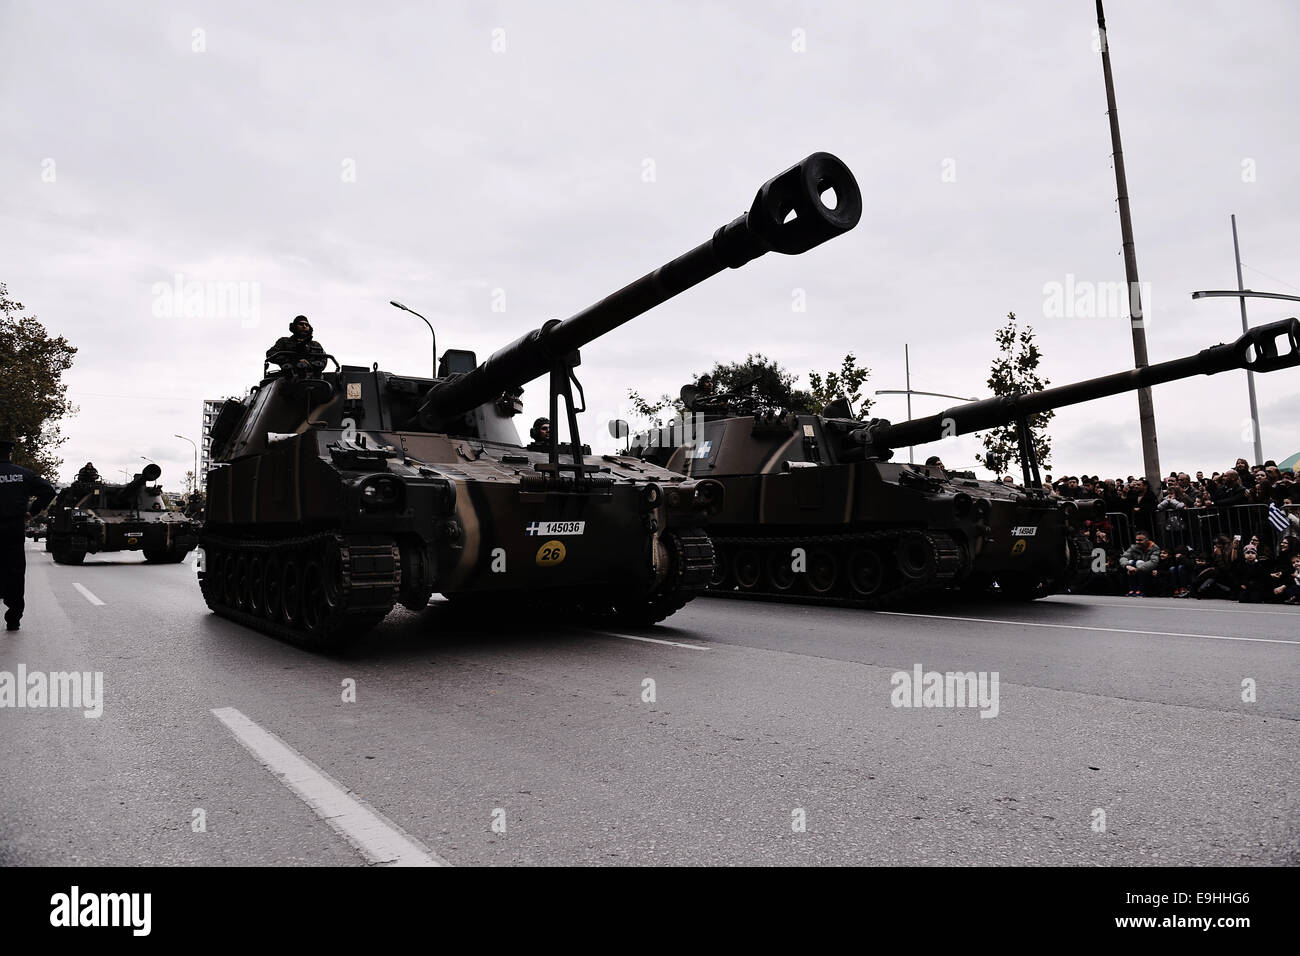 Thessaloniki, Greece. 28th October, 2014. M109 Howitzers of the Greek Army parade in Thessaloniki during the celebrations of the 28th of October anniversary, the date that Greece entered the World War II in 1940. Credit:  Giannis Papanikos/Alamy Live News Stock Photo